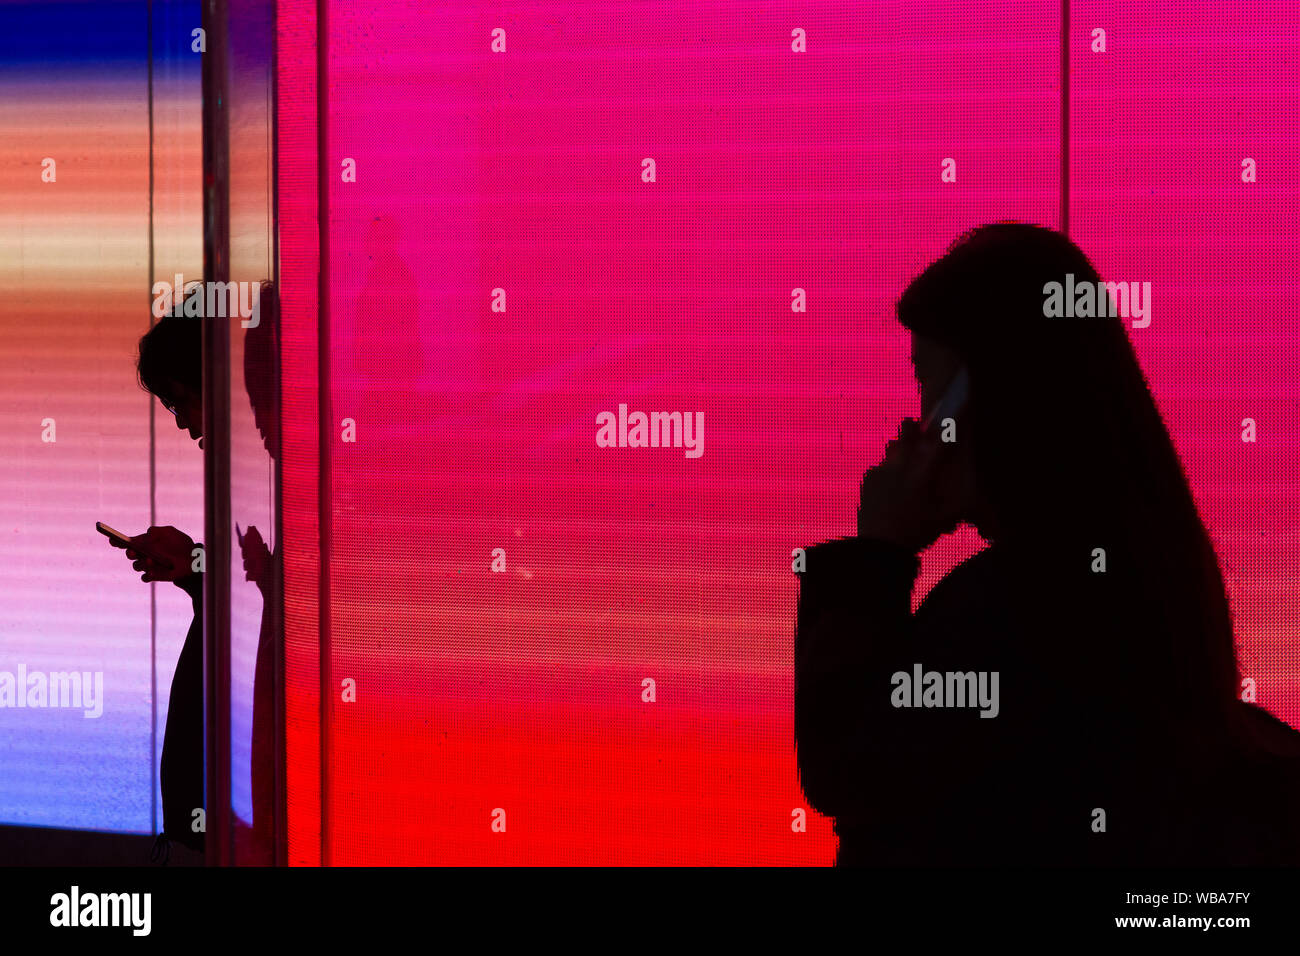 Silhouettes of young people using mobile phones in front of a colourful illuminated wall in Shibuya, Tokyo, Japan, Stock Photo